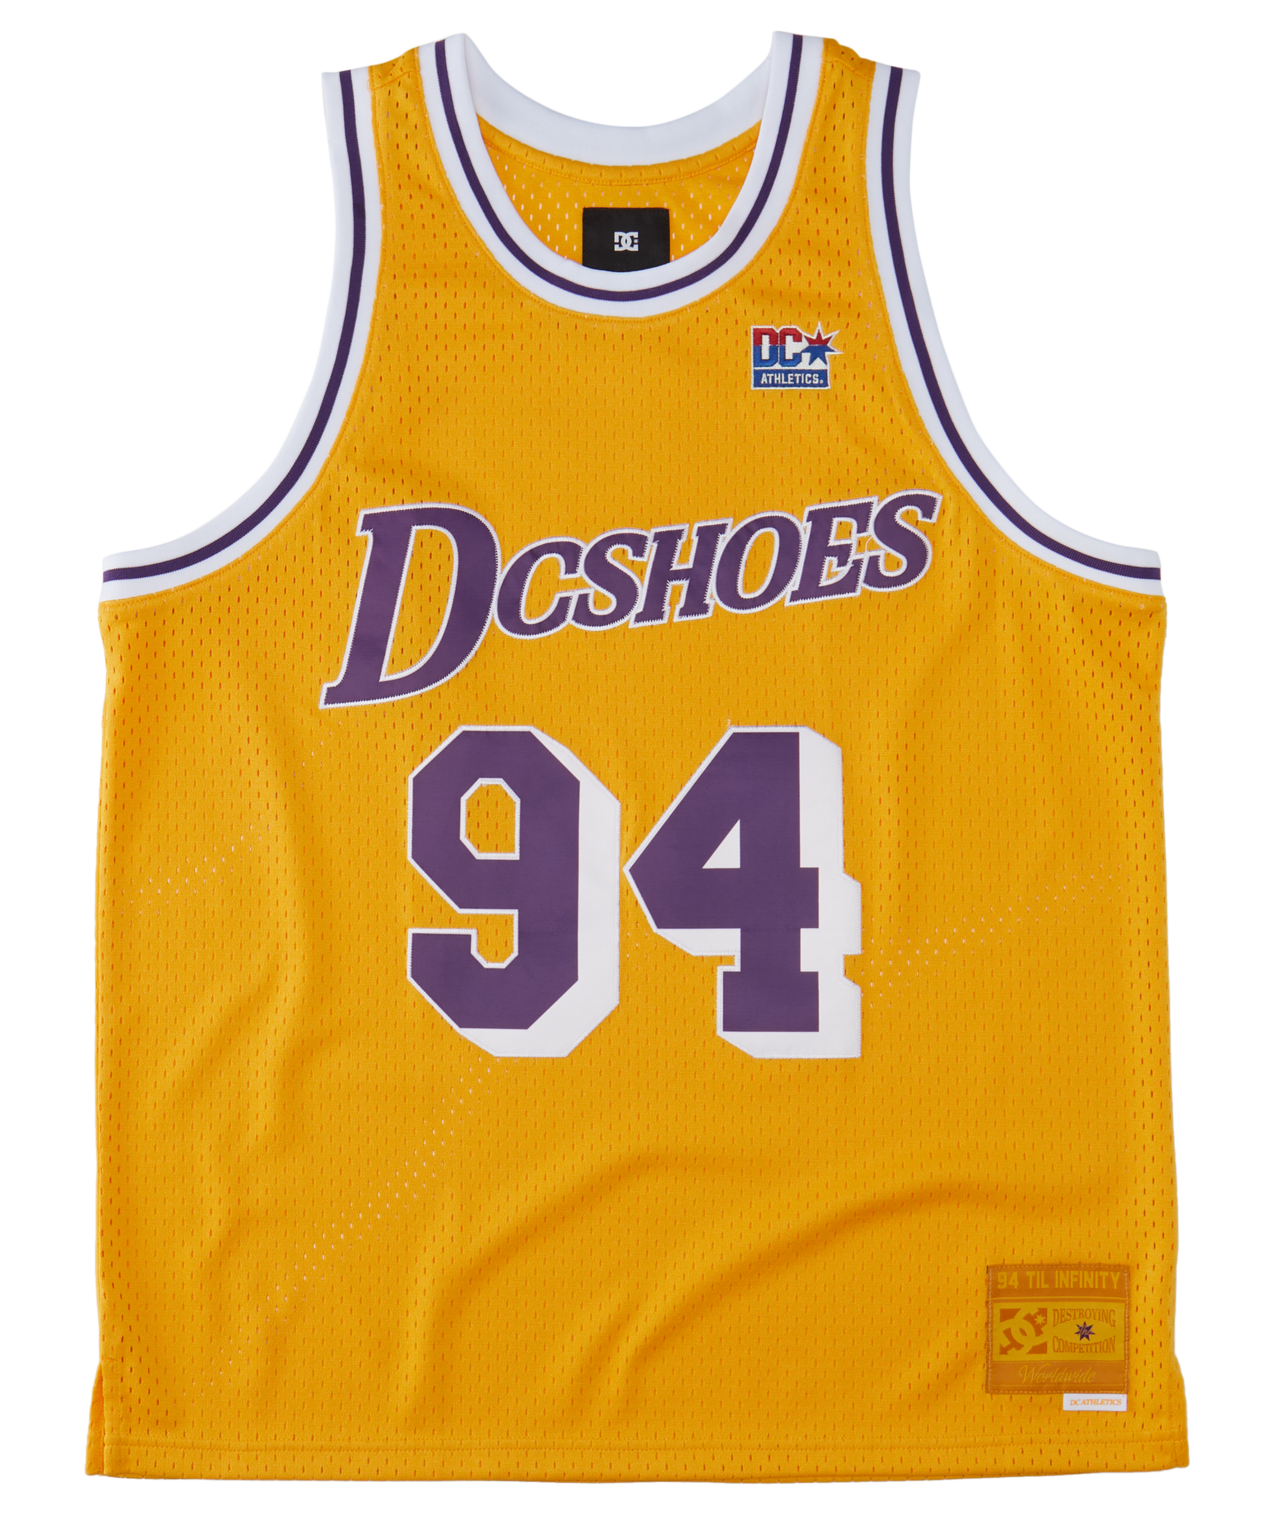 DC Showtime Jersey